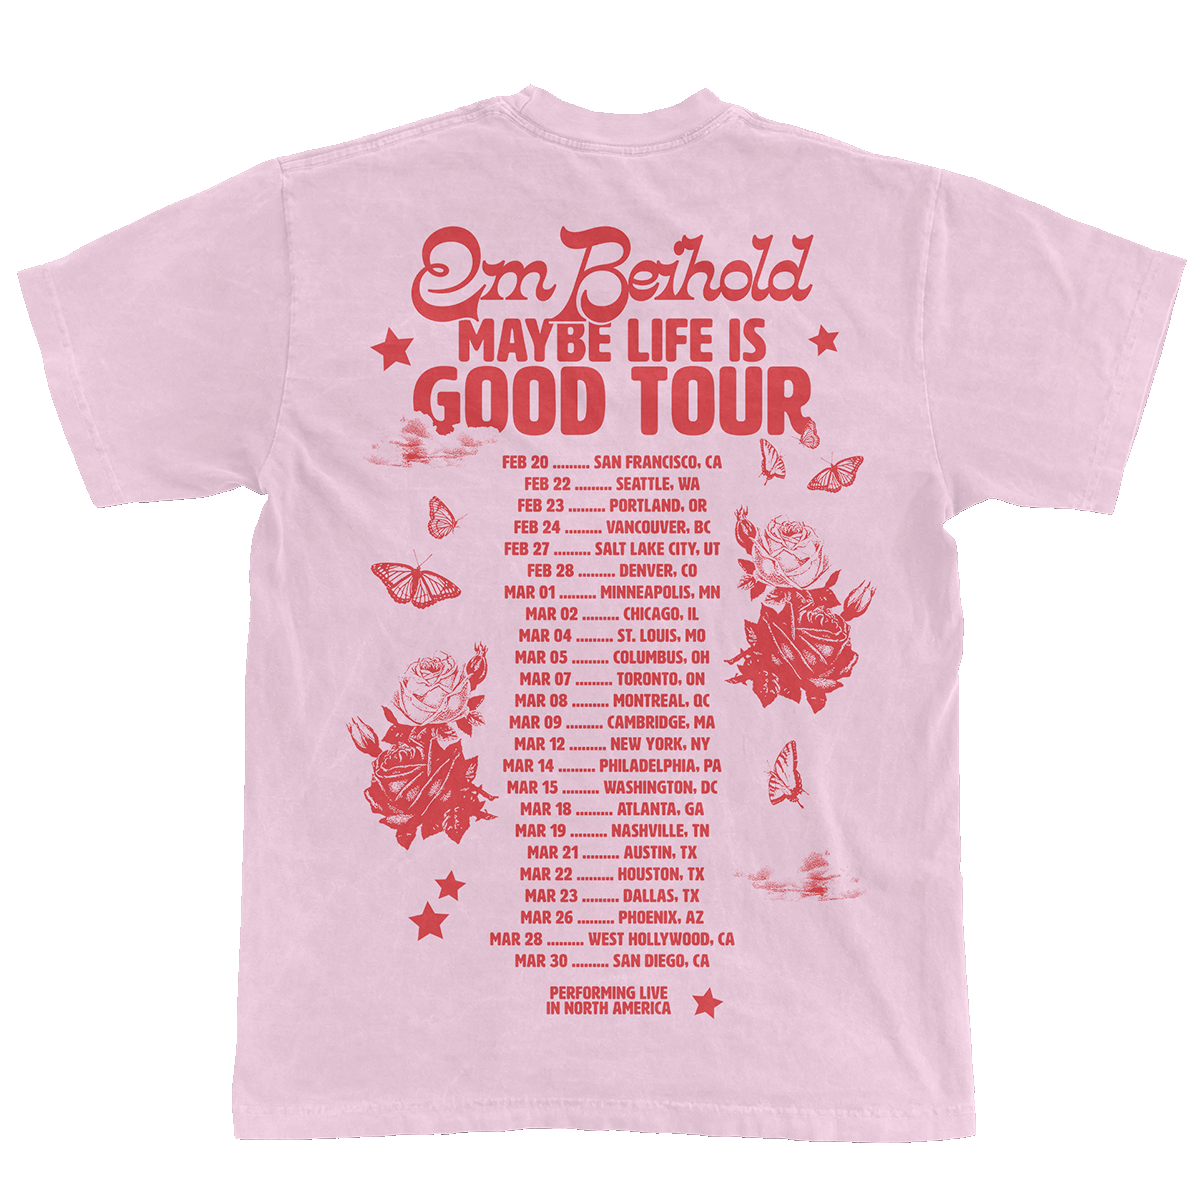 Maybe Life is Good Tour Tee